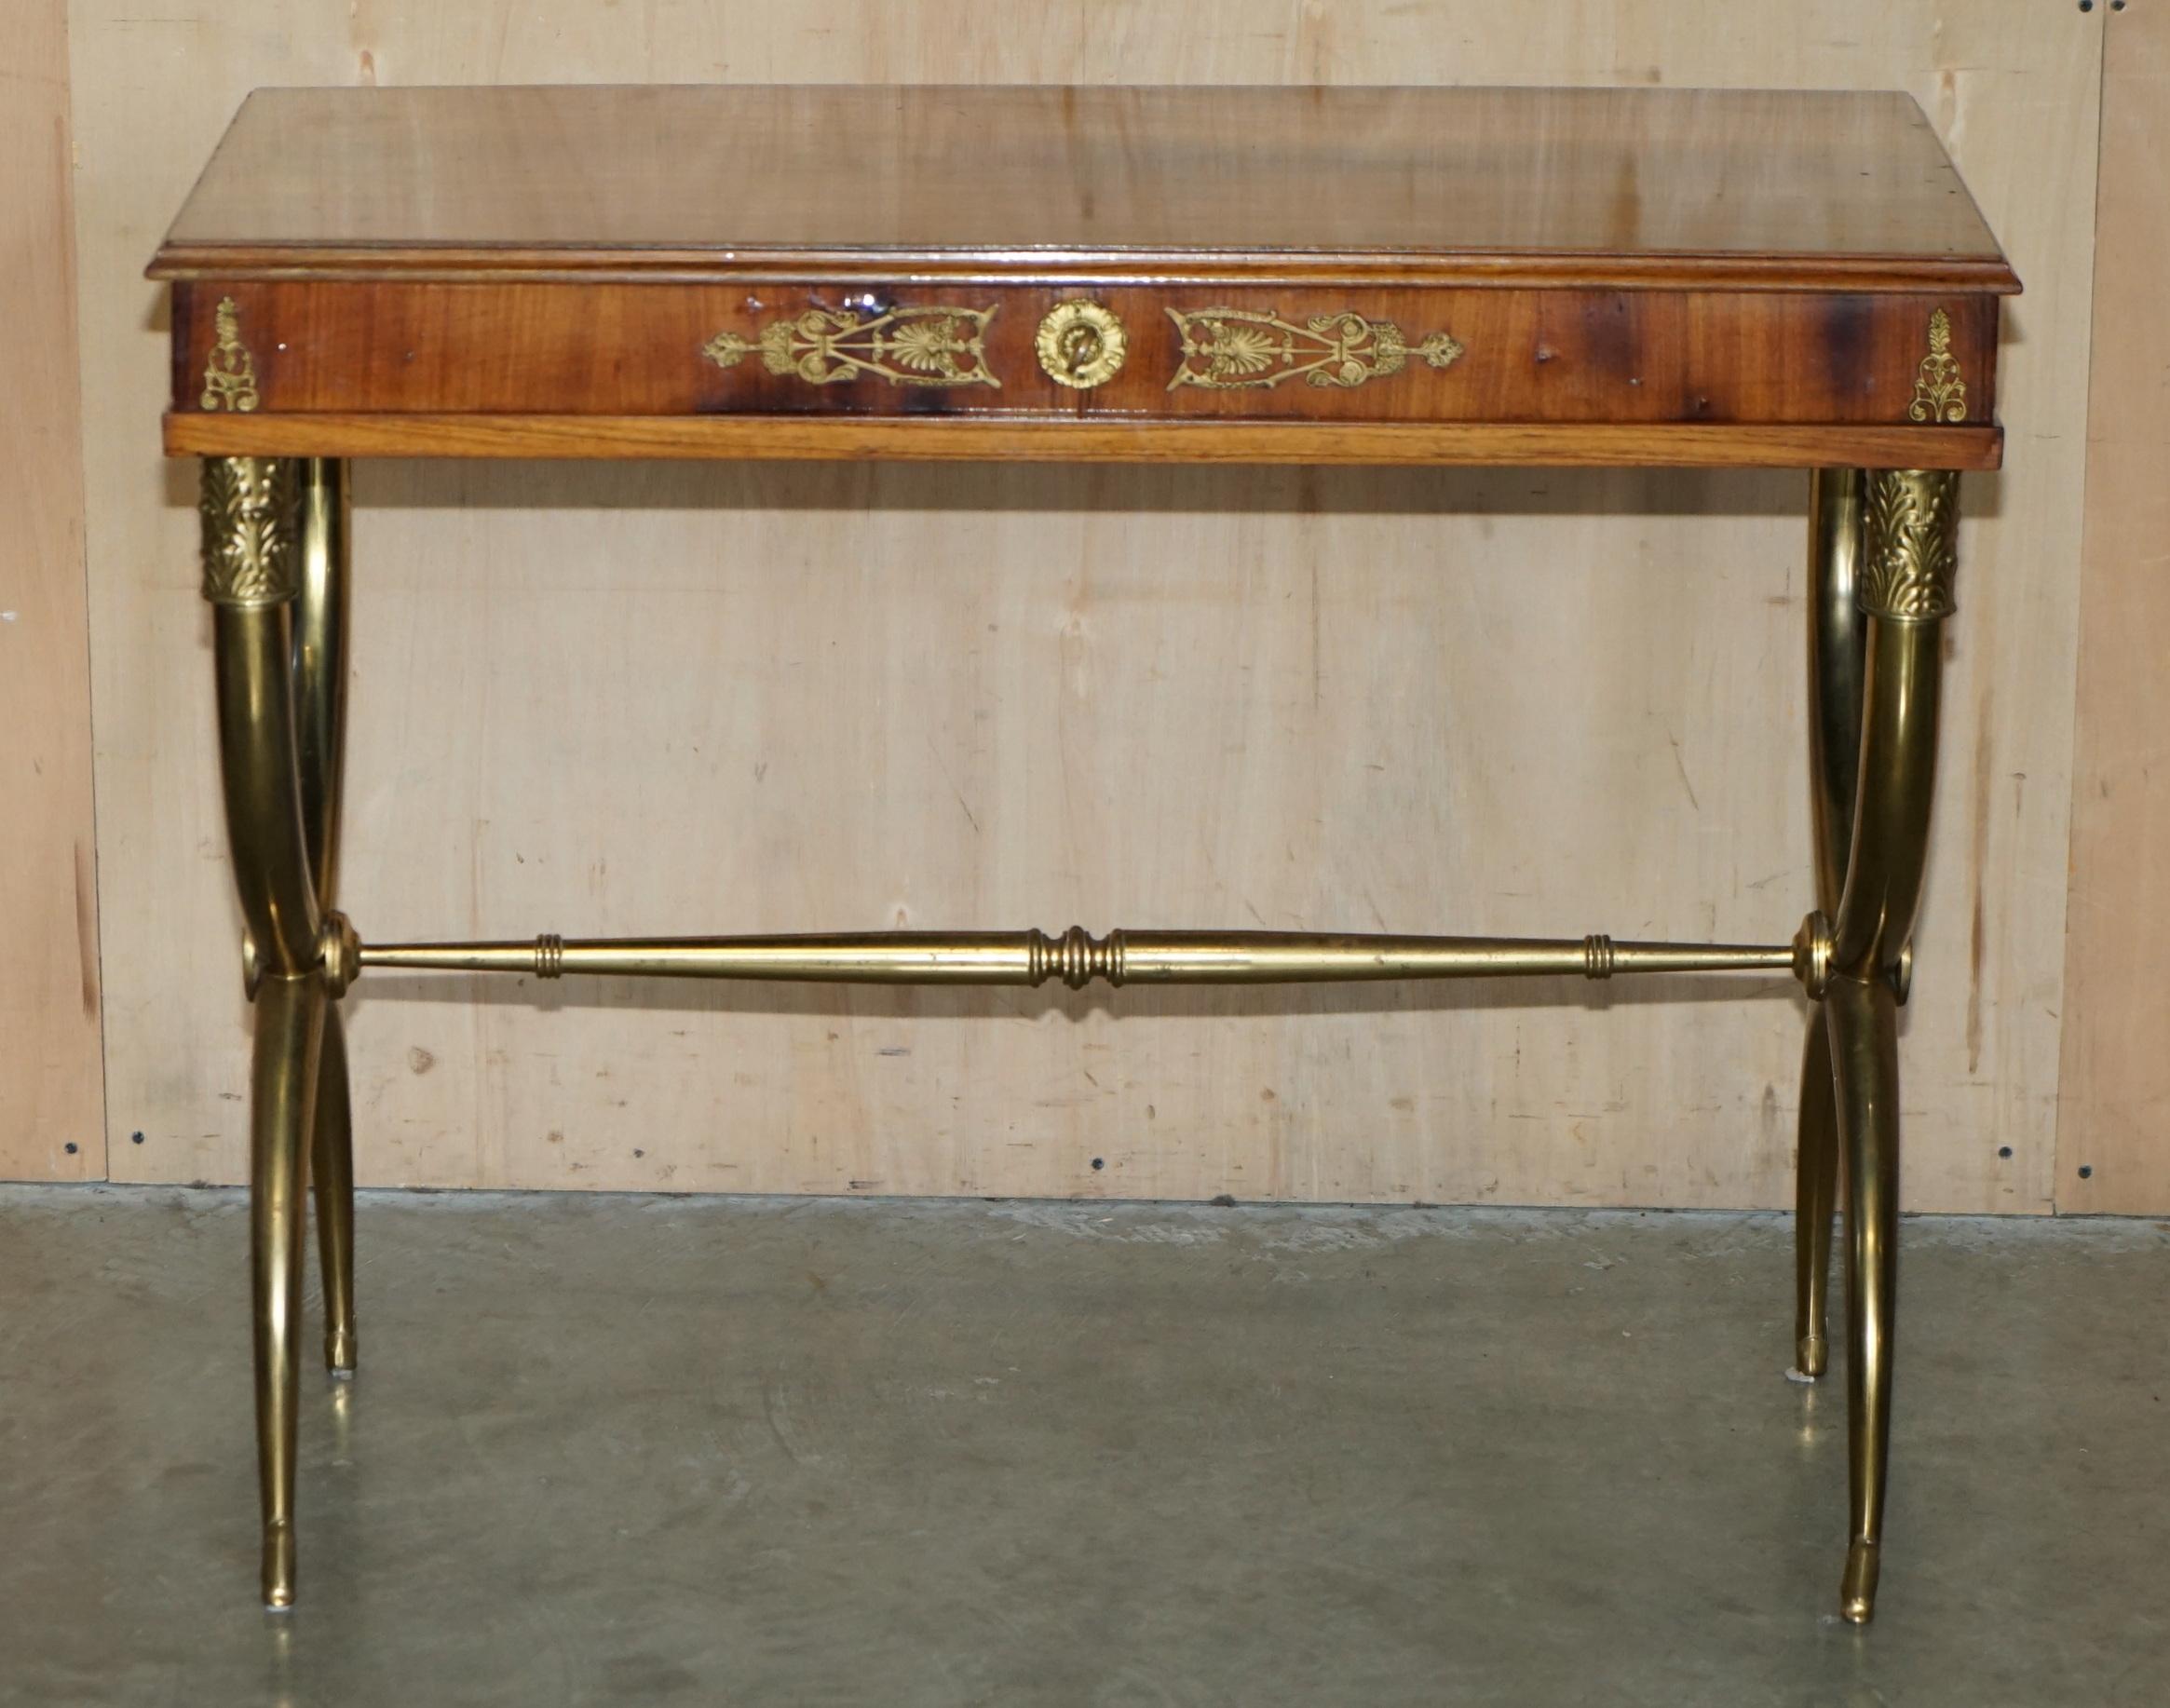 Royal House Antiques

Royal House Antiques is delighted to offer for sale this absolutely stunning, Regency Neoclassical style Walnut & Satinwood writing table with X framed solid brass base and hidden internal storage 

Please note the delivery fee